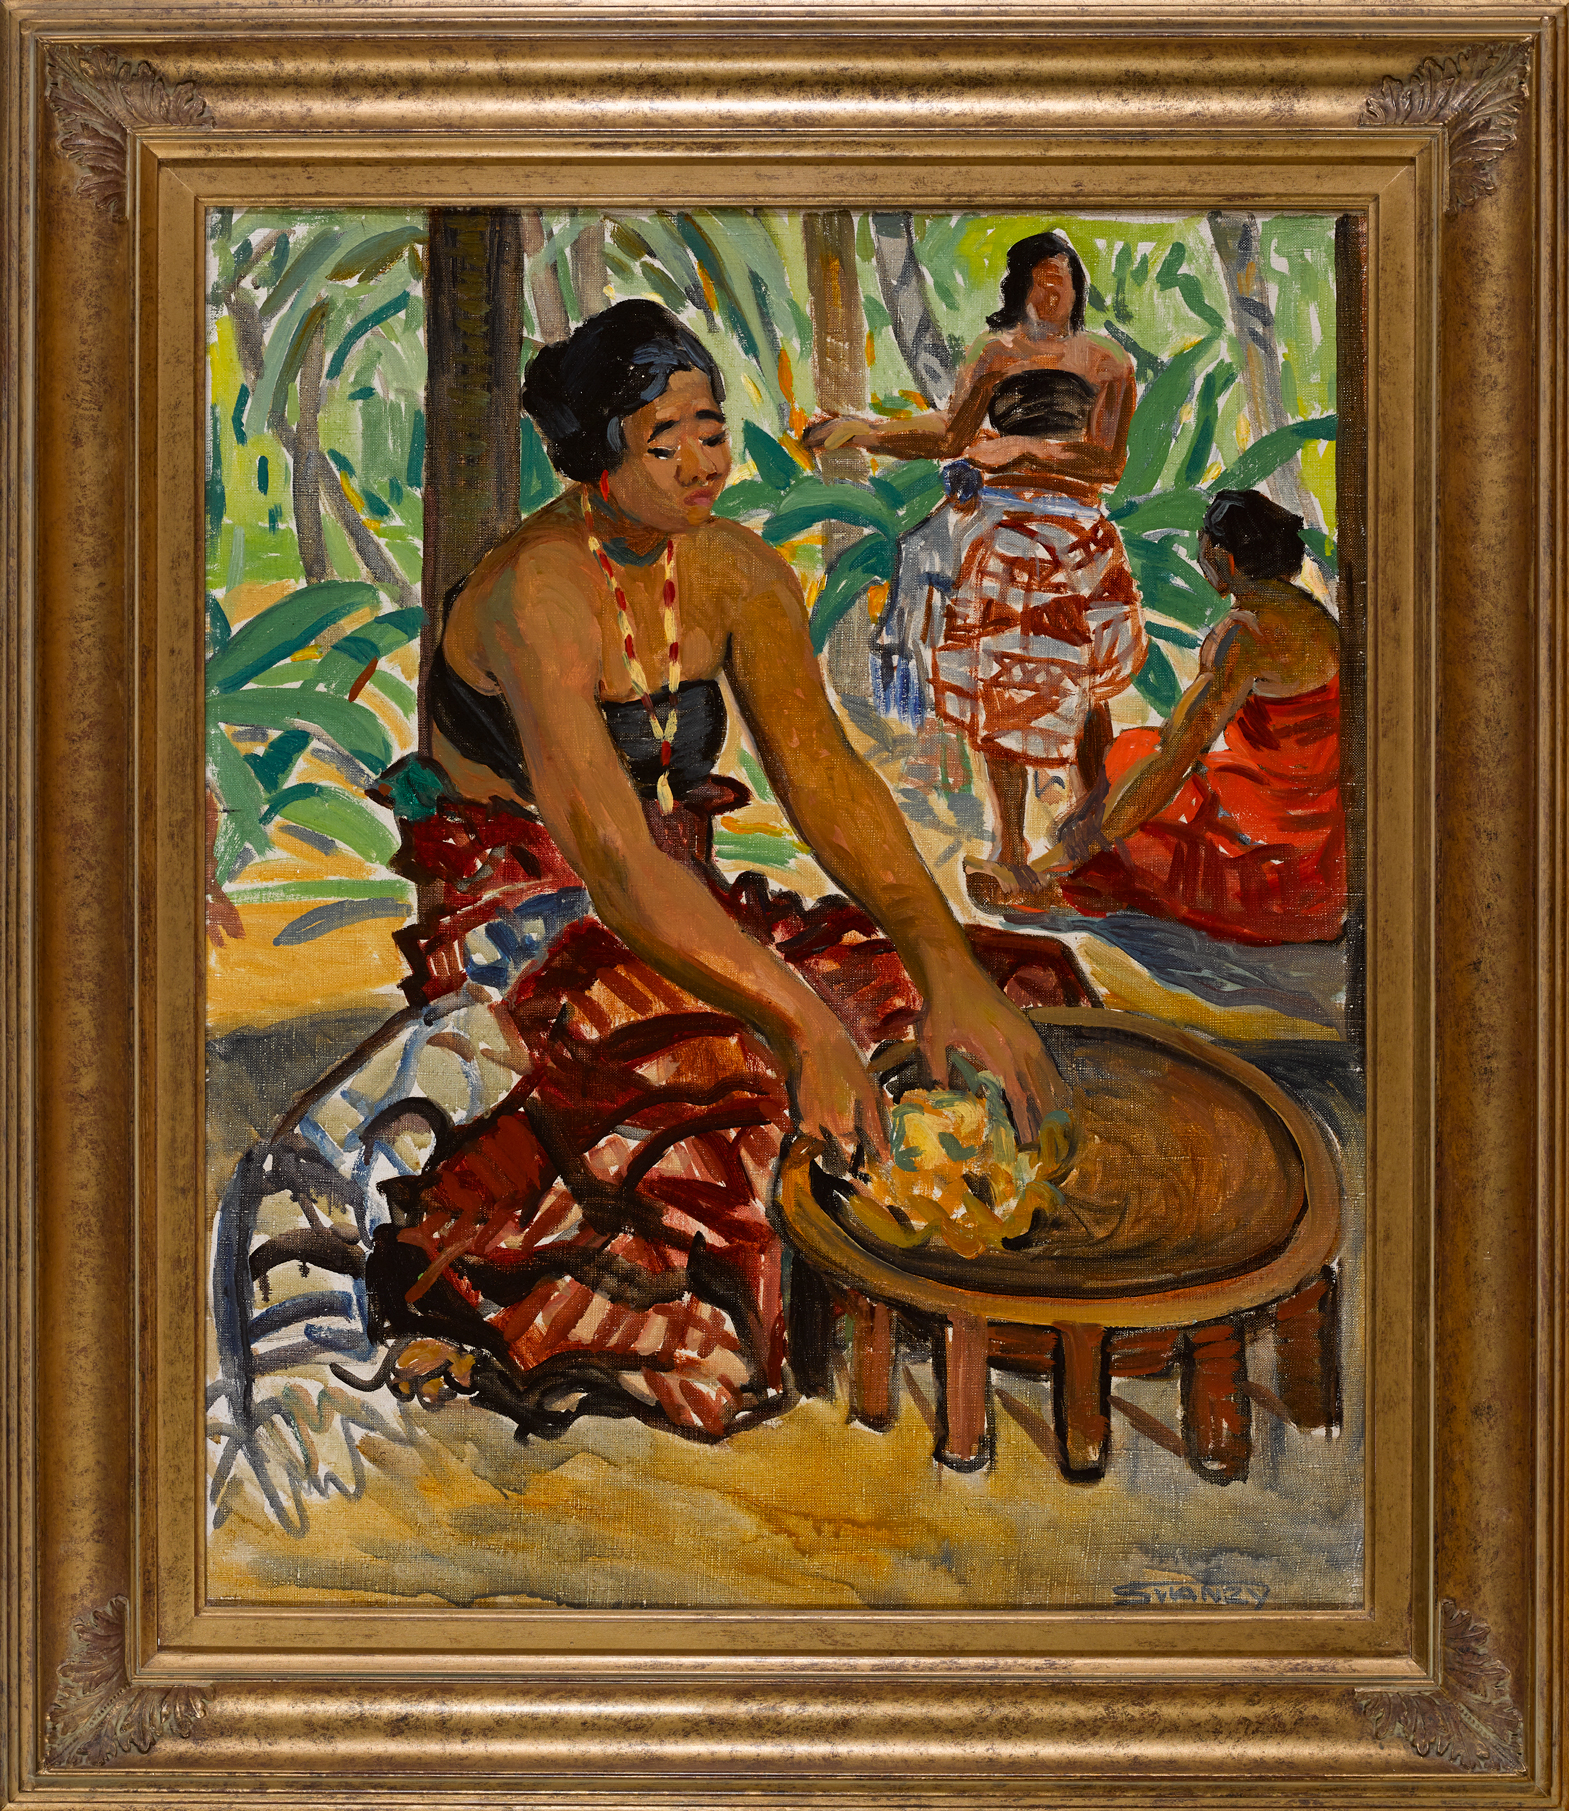 Mary Swanzy HRHA (1882-1978) PREPARING THE MEAL, SAMOA, c. 1919-25 oil on canvas signed lower right, - Image 2 of 5